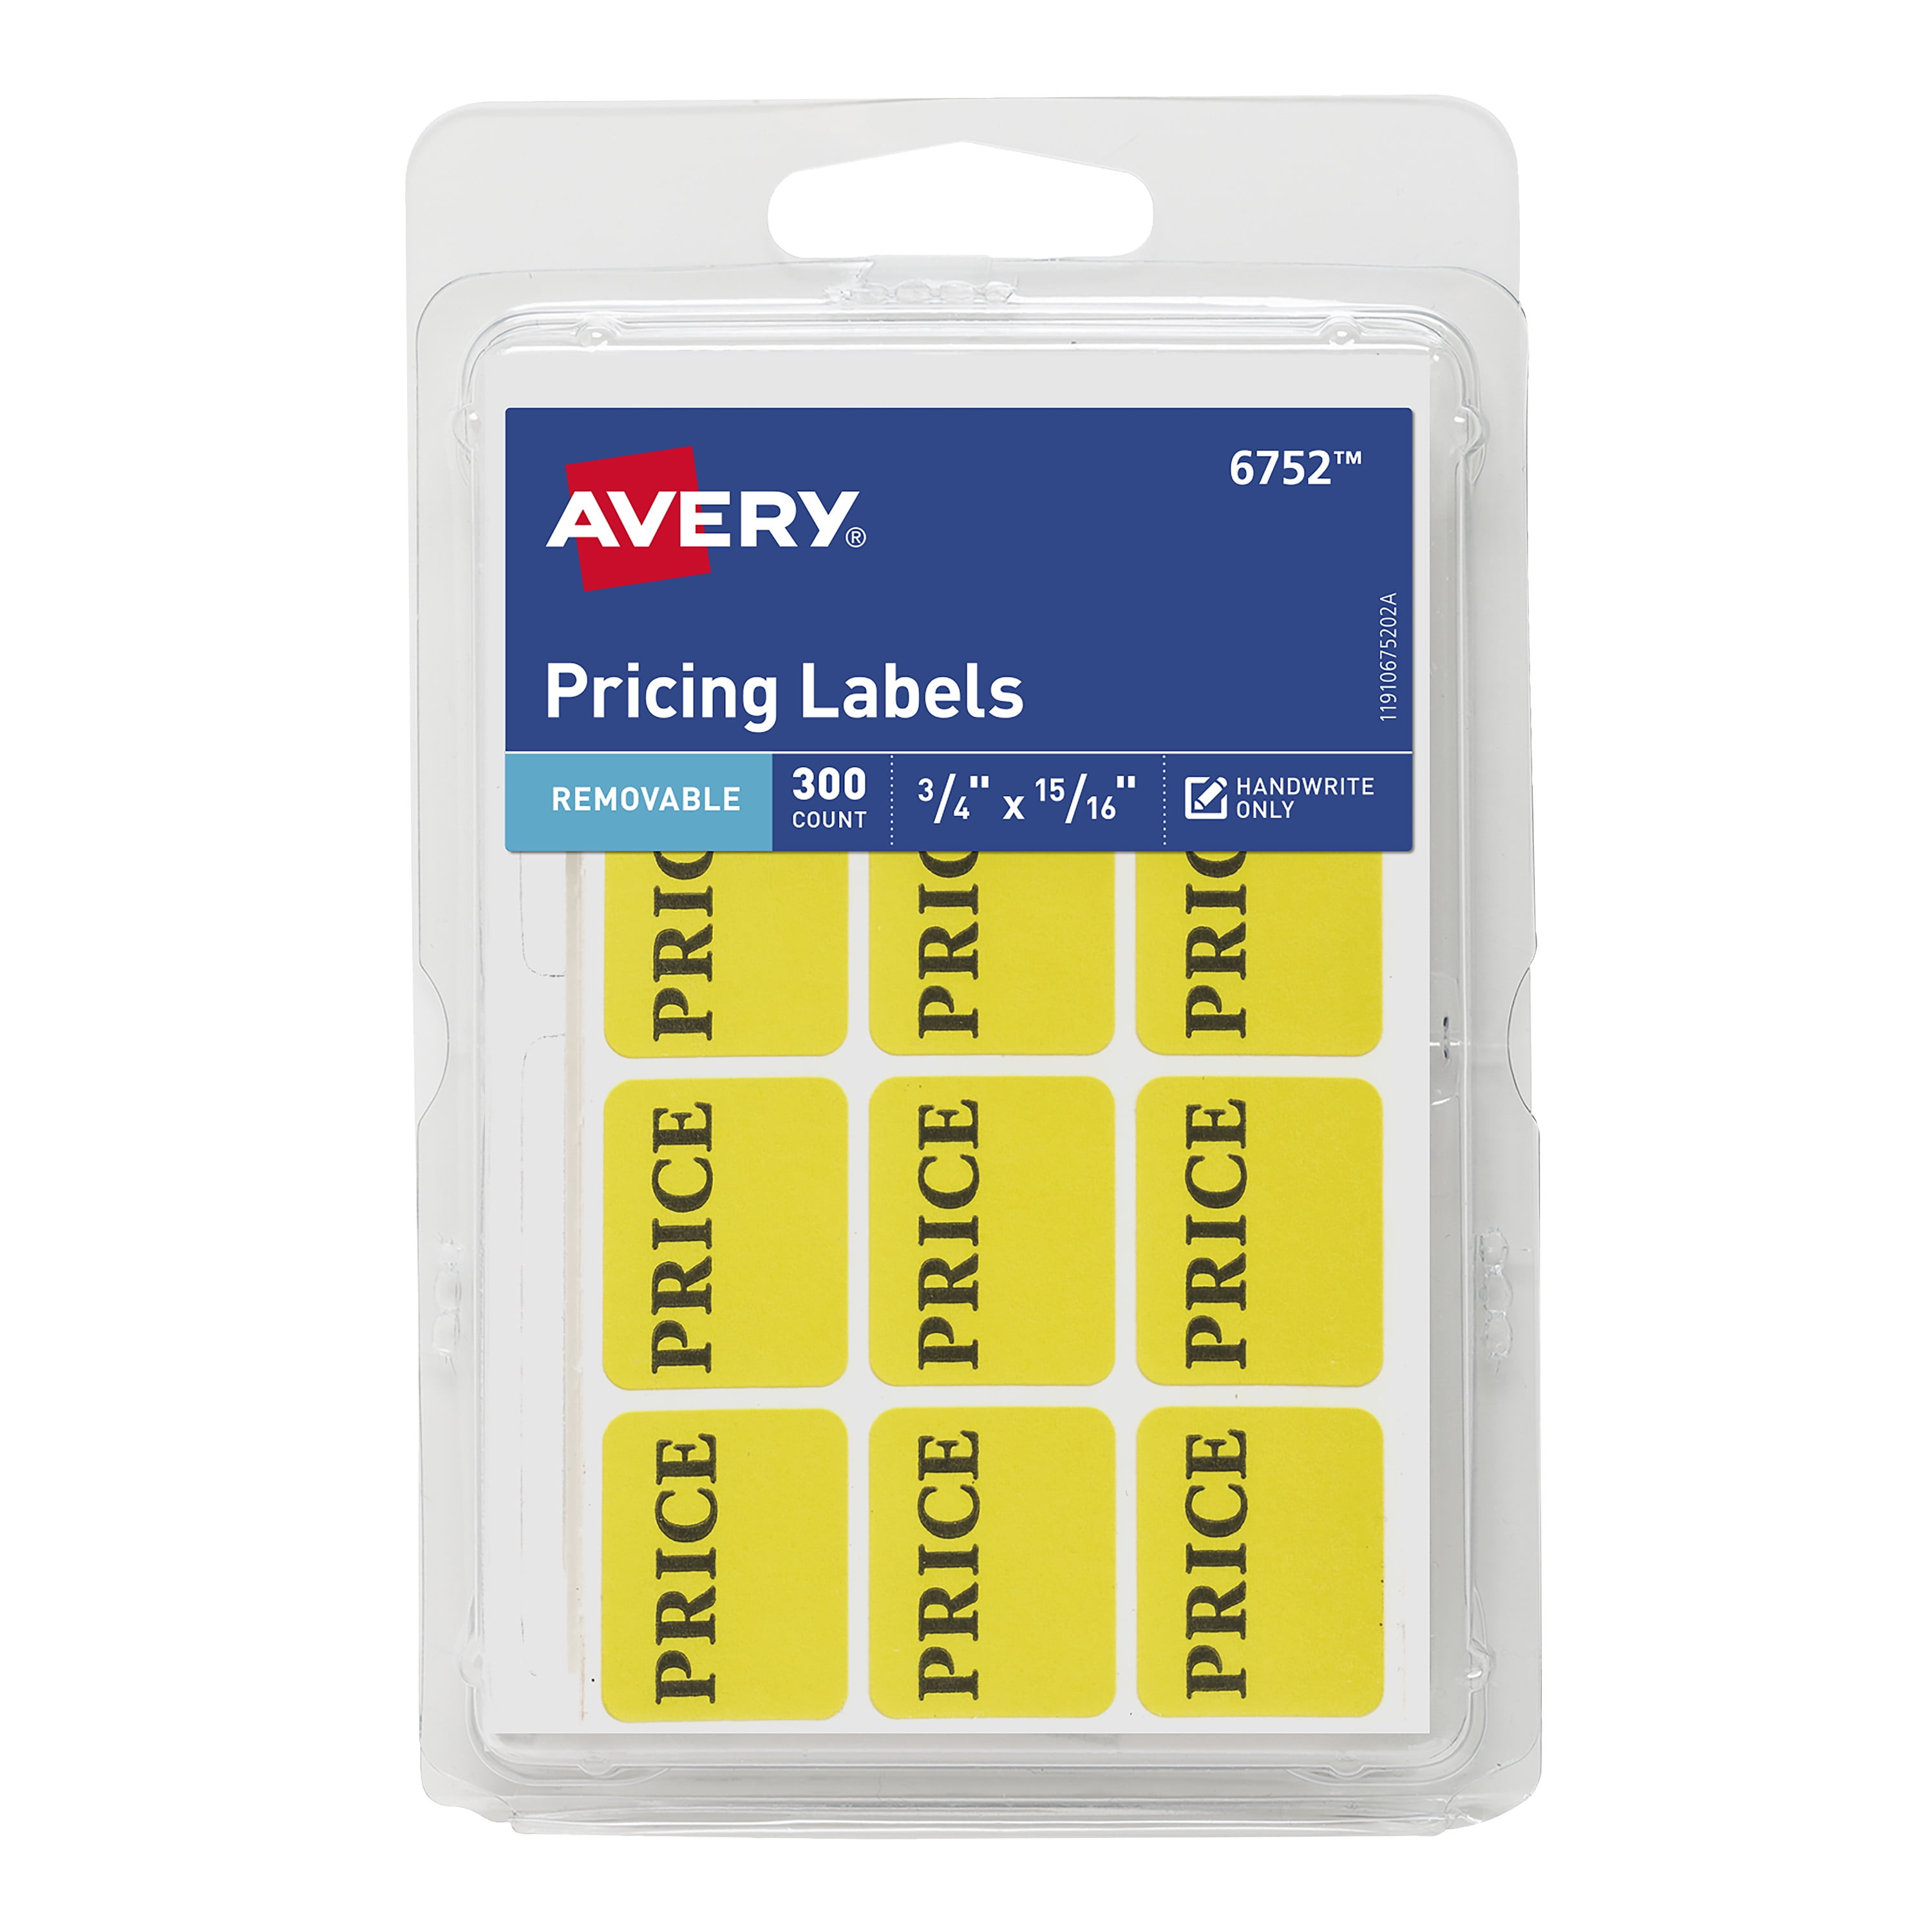 Avery Pricing Labels, Yellow, 3/4" x 15/16", Removable, Handwrite, 300 Labels (16752)